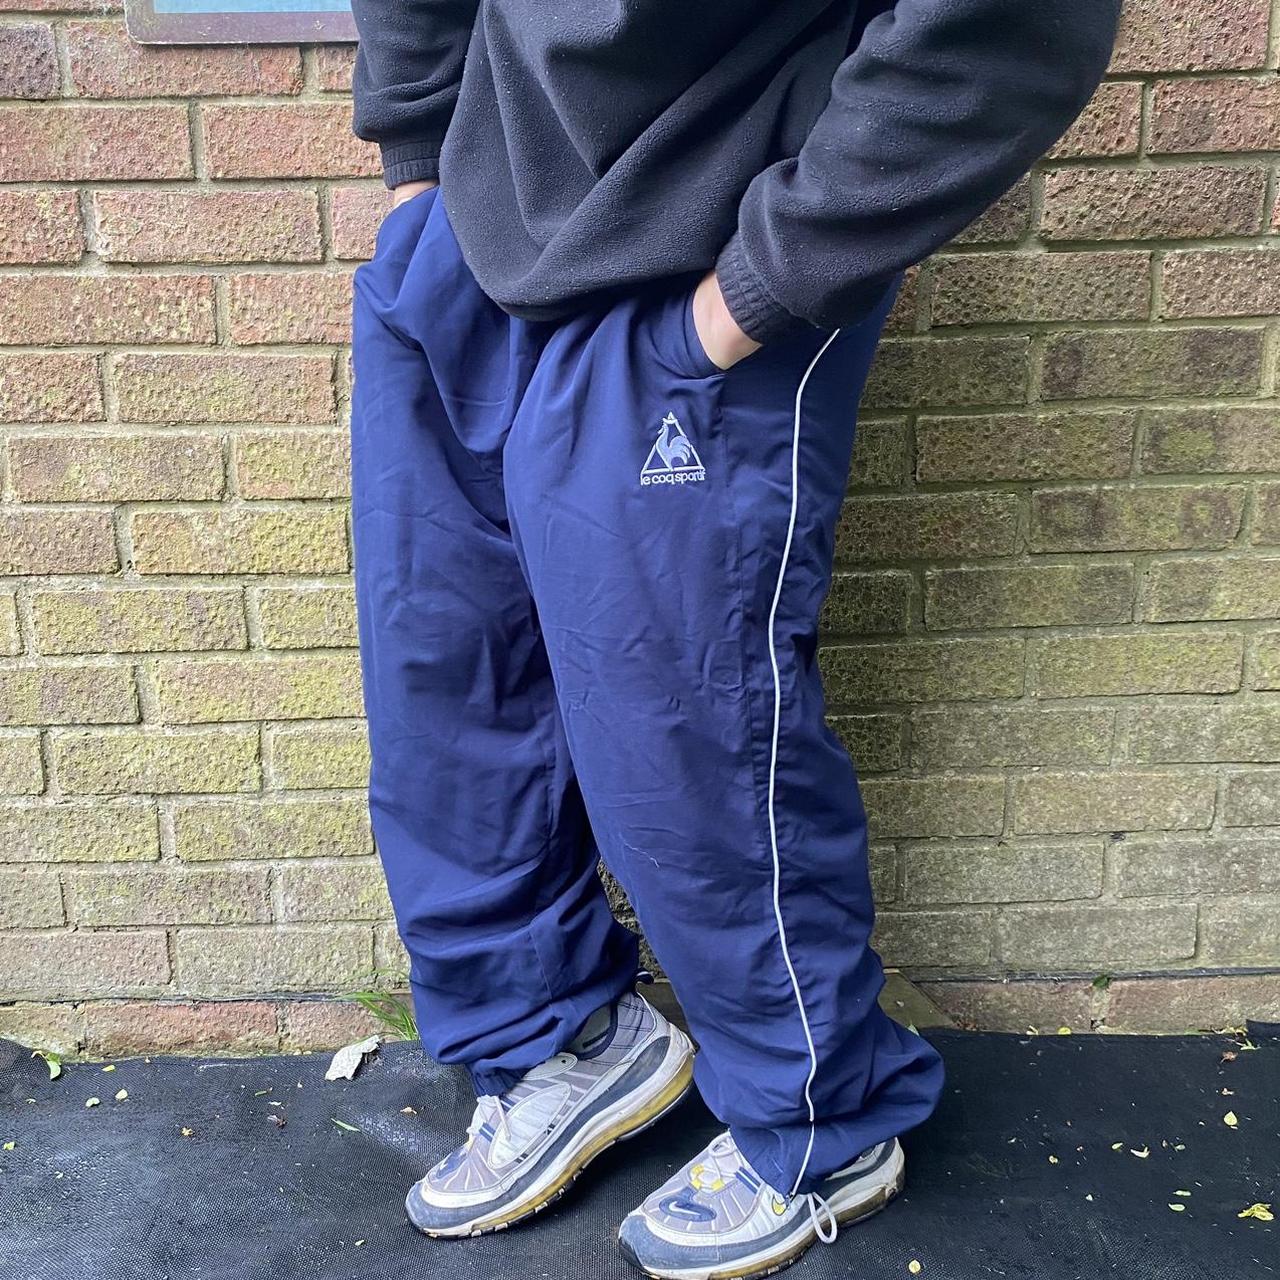 Le Coq Sportif Men's Navy and White Joggers-tracksuits | Depop